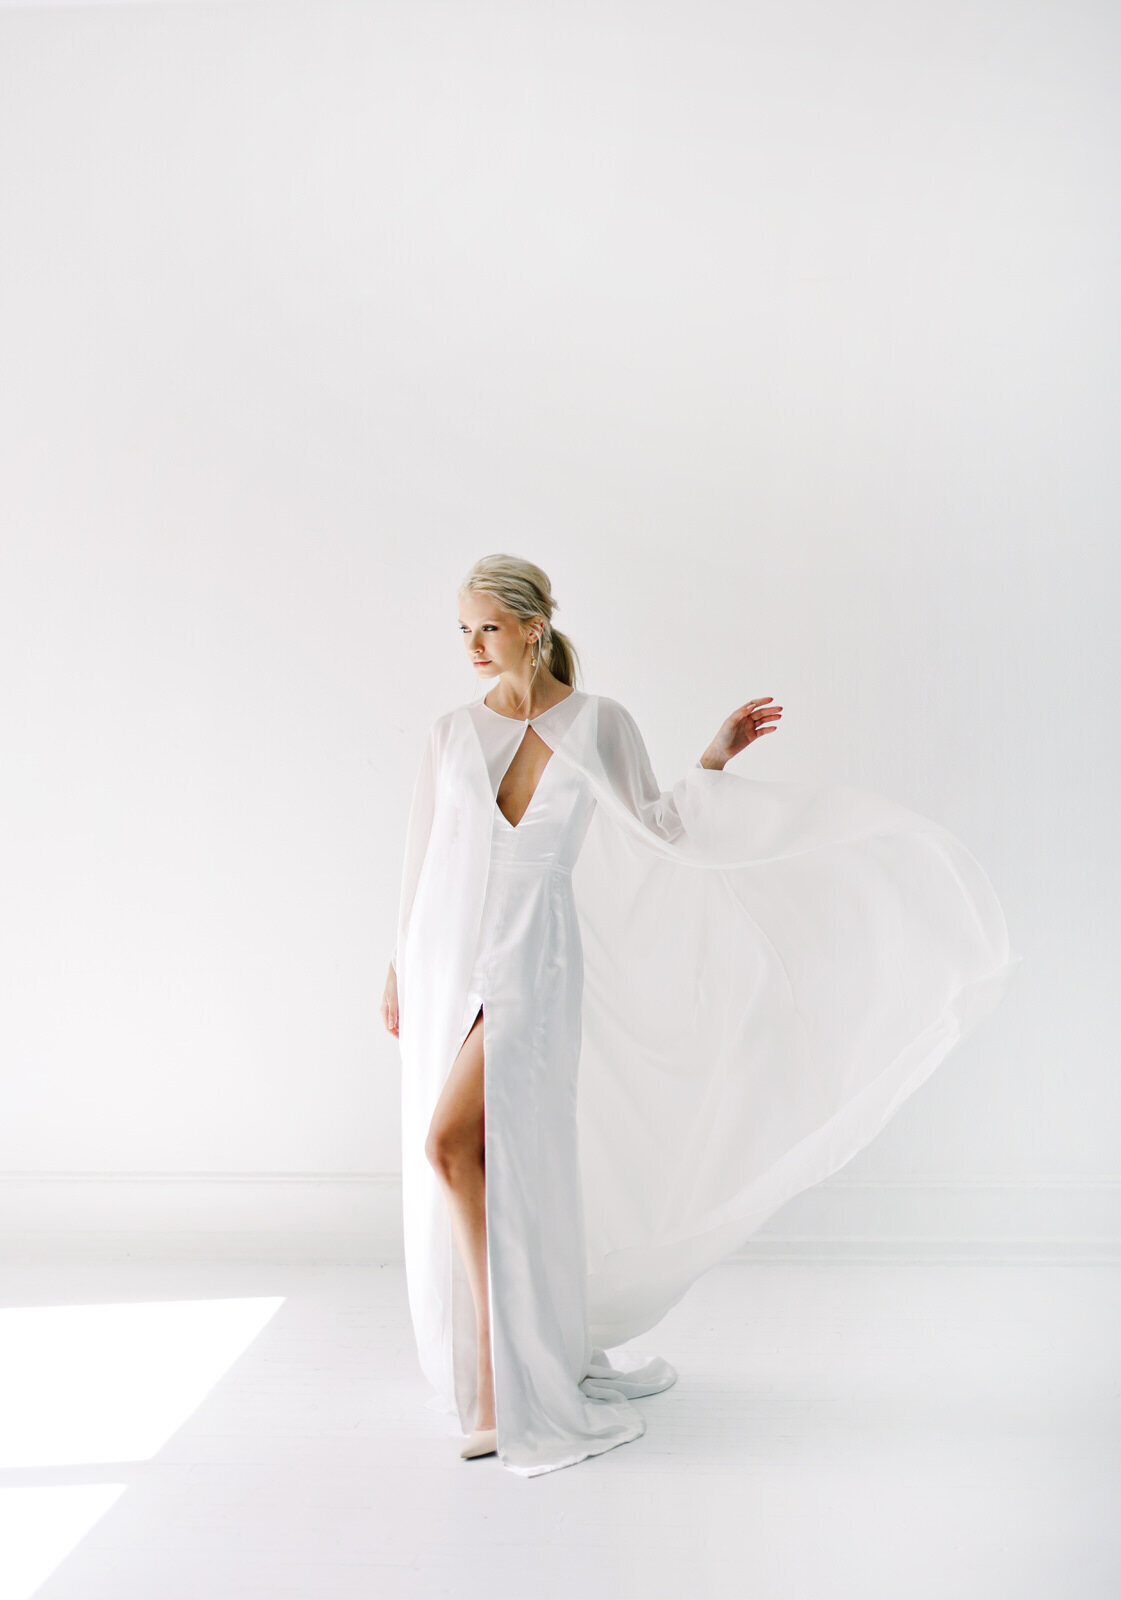 Stylish Bridal Editorial Photography for a New York City Brand 25